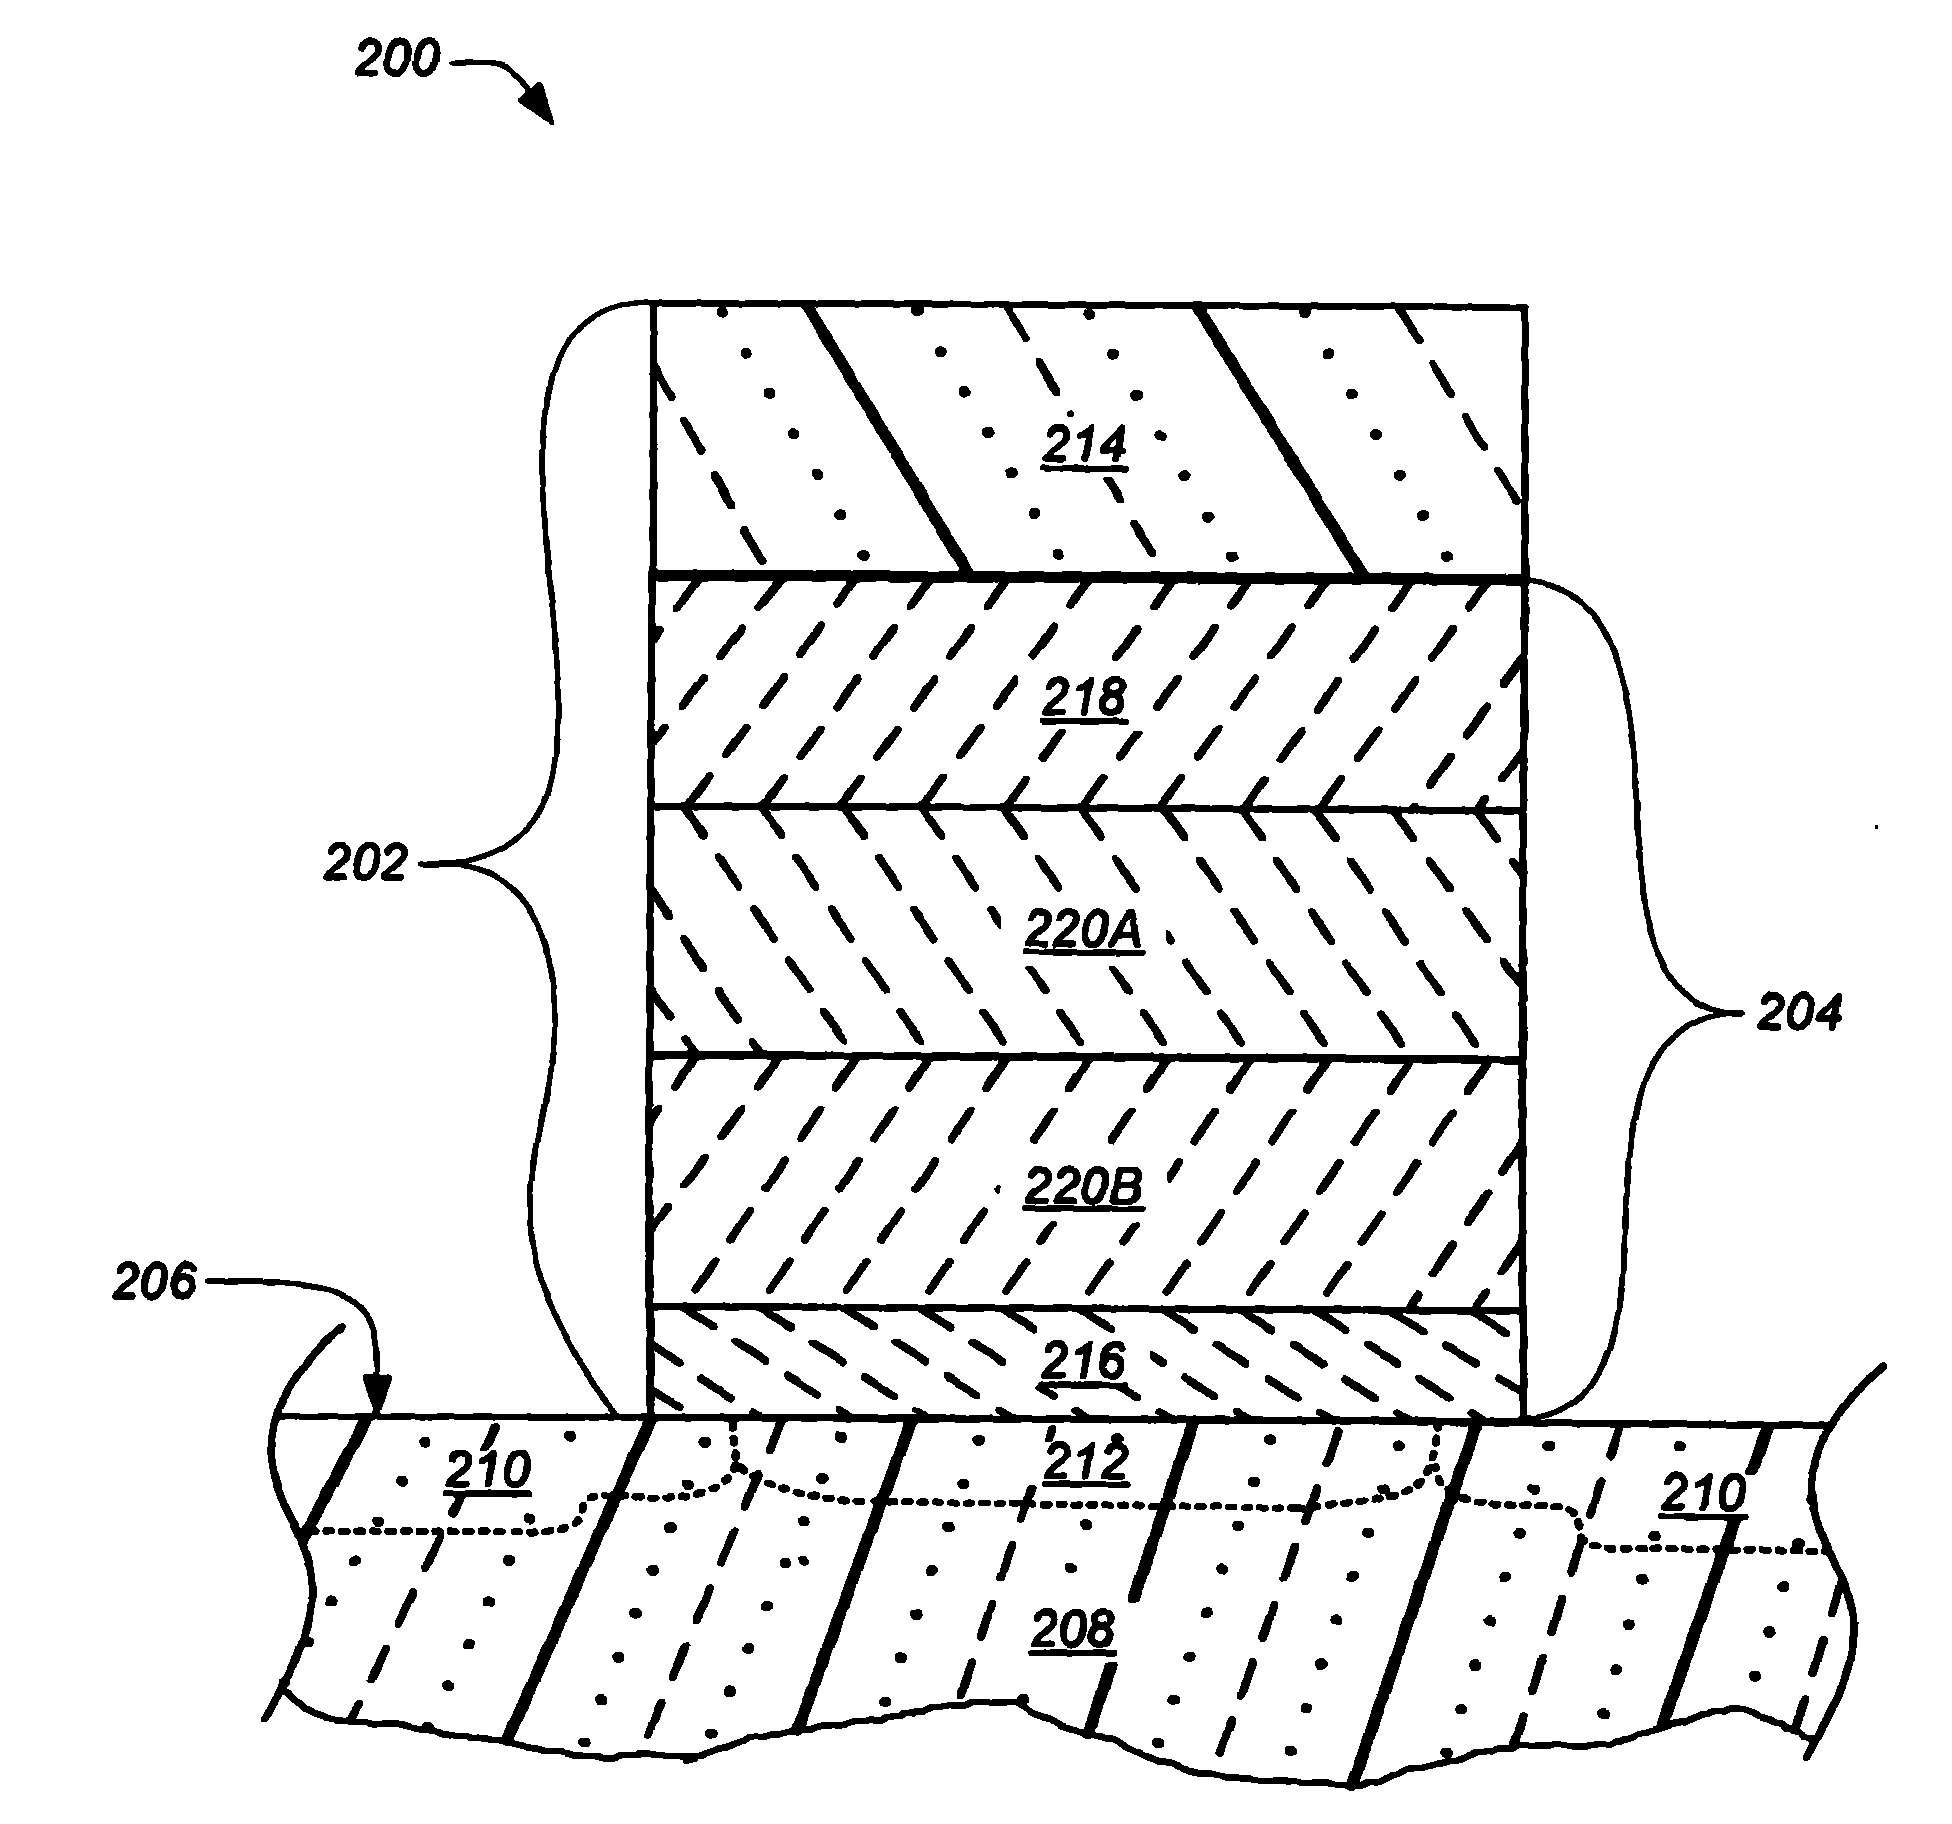 Oxide-nitride-oxide stack containing a plurality of oxynitrides layers